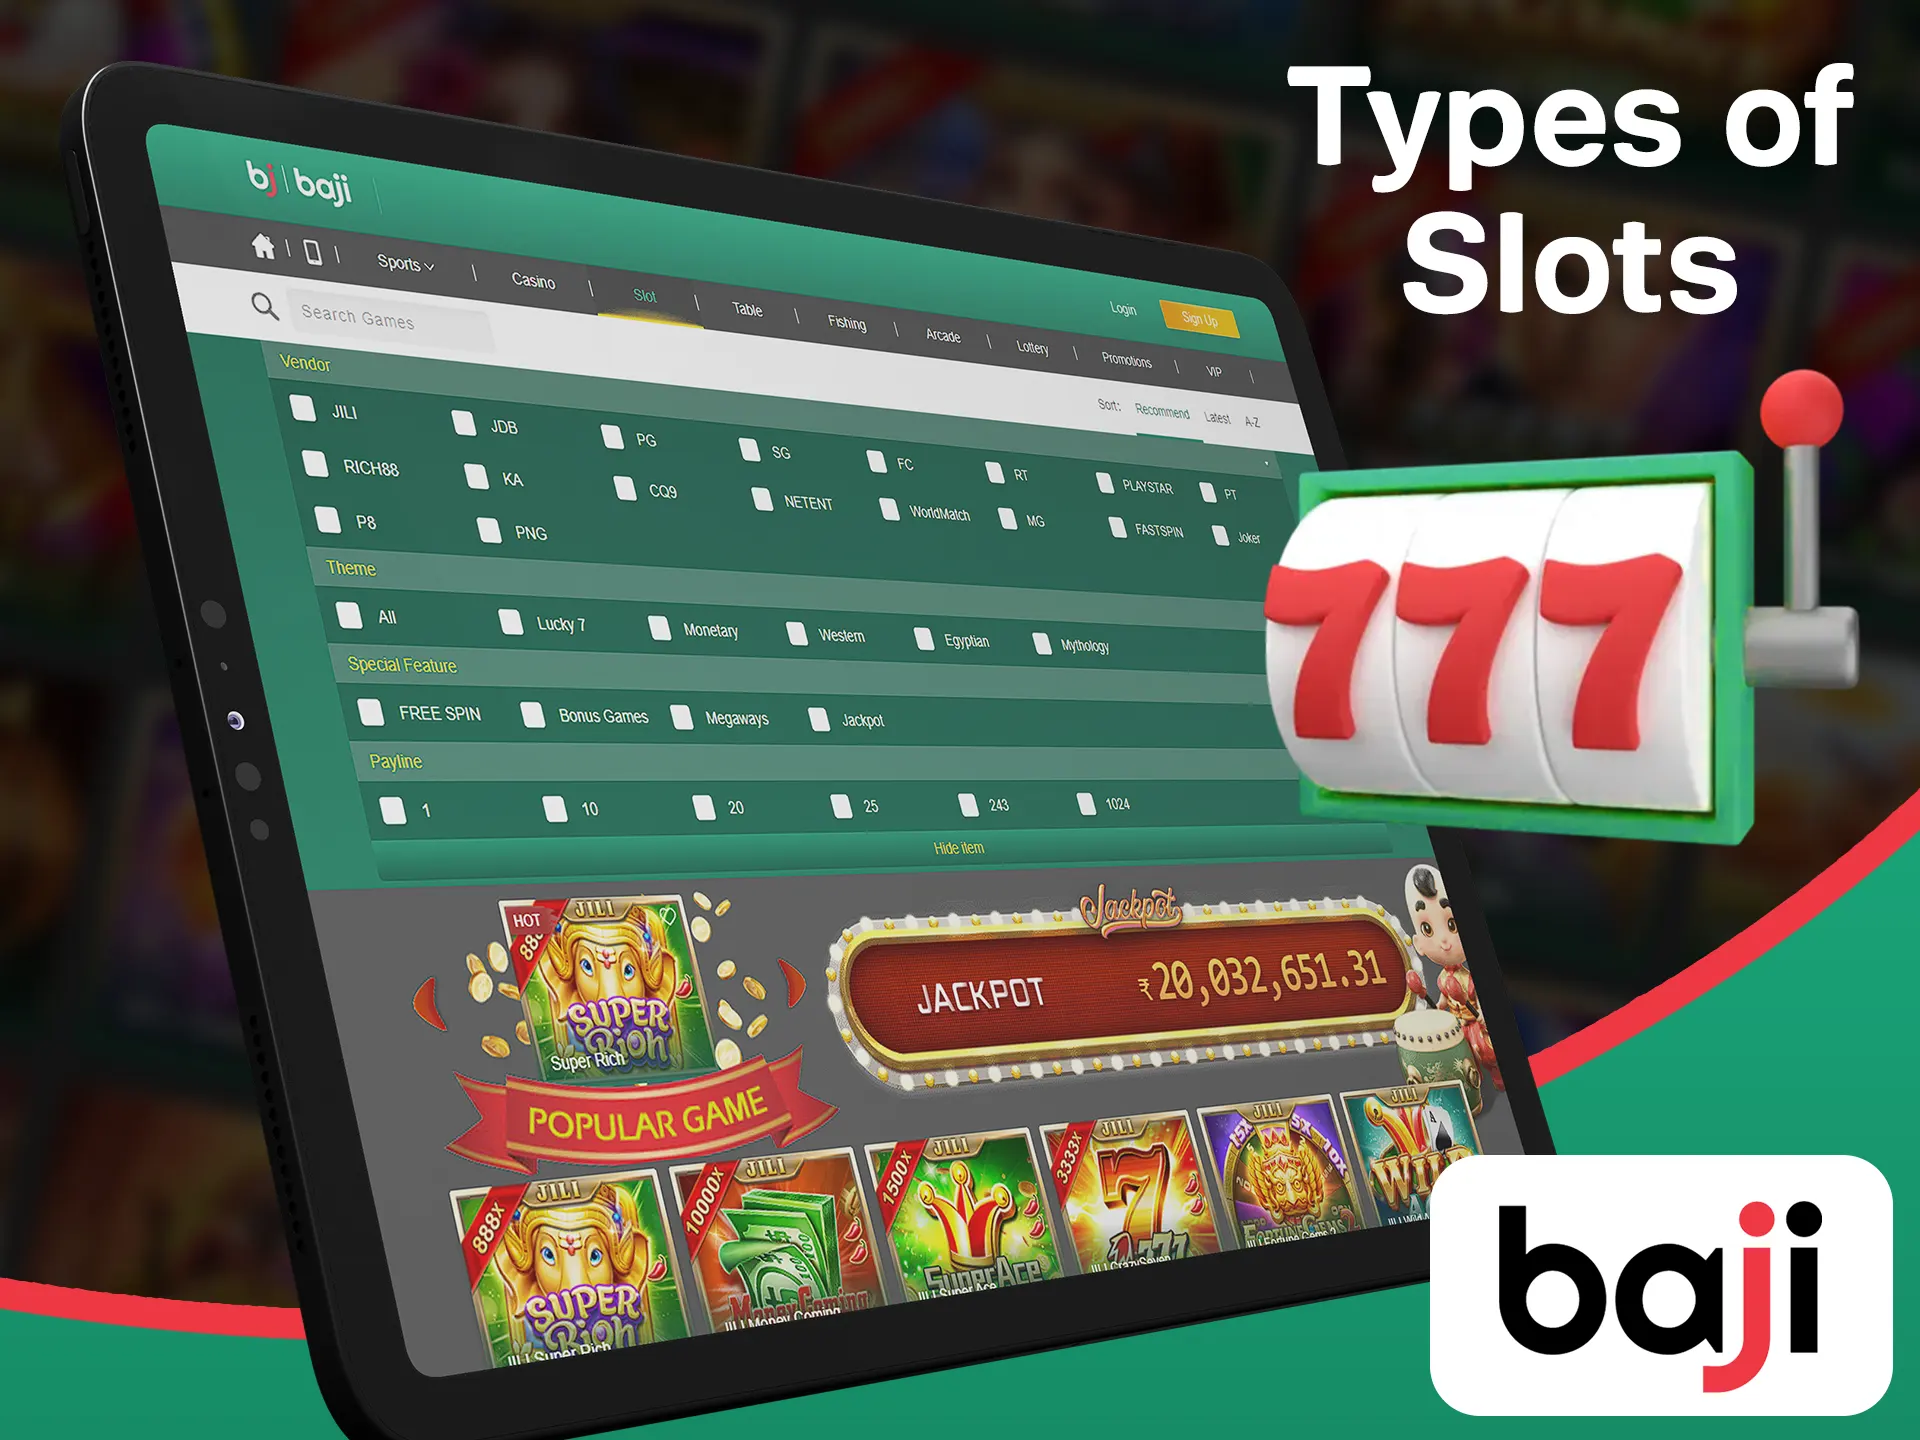 Check for the different types of slots at the Baji.